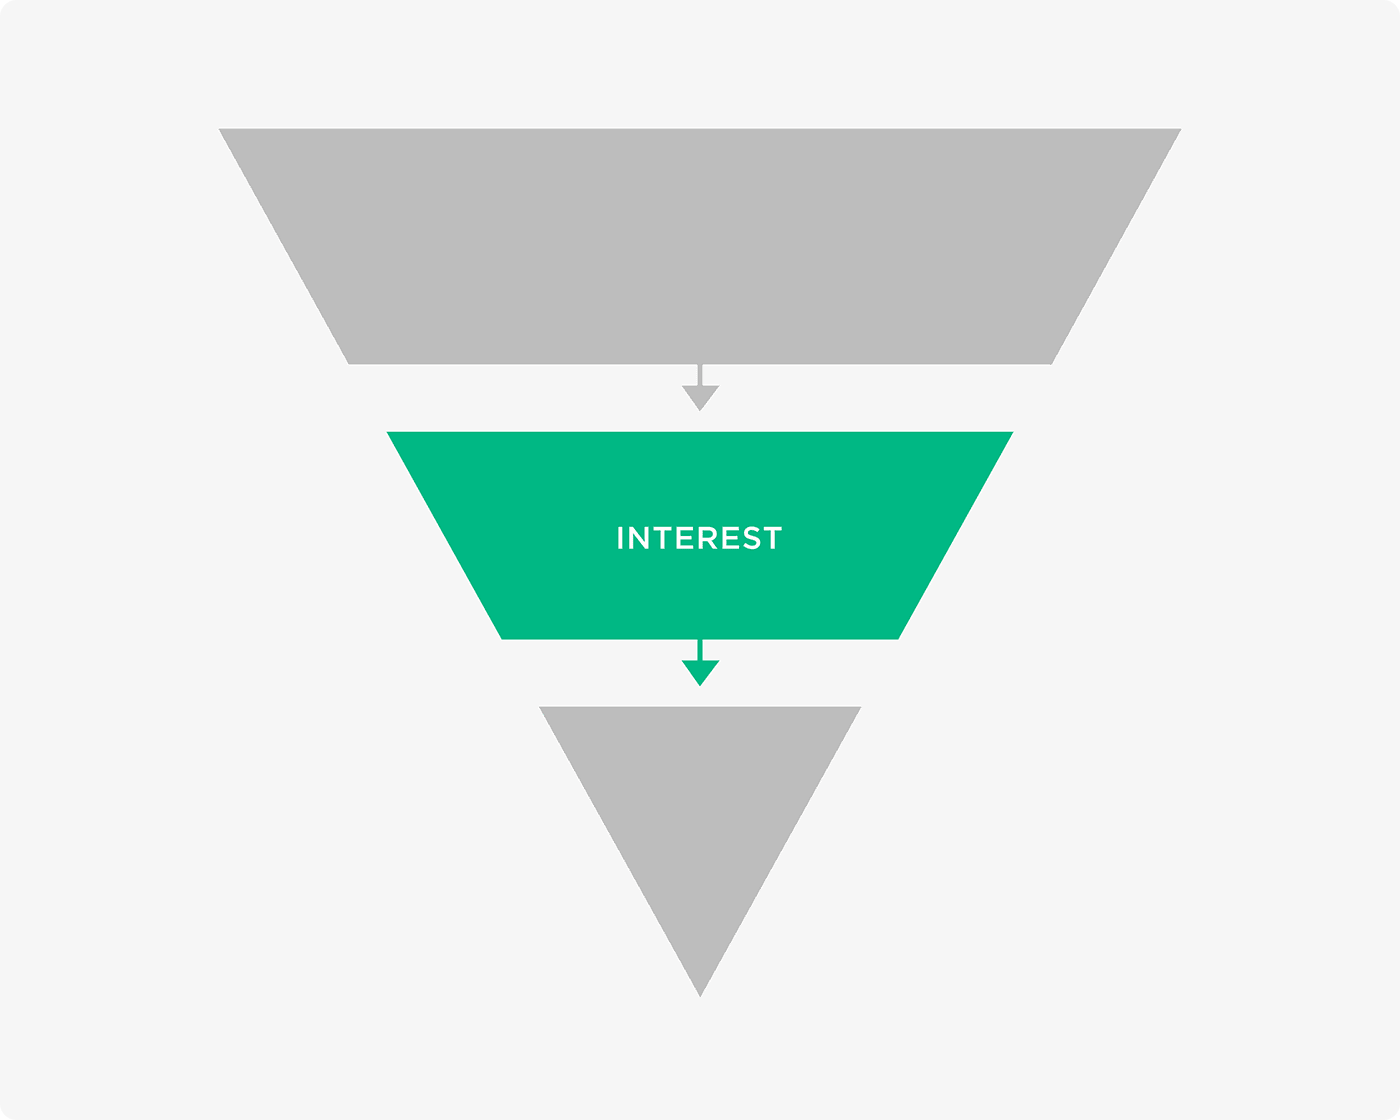 The middle of the marketing funnel